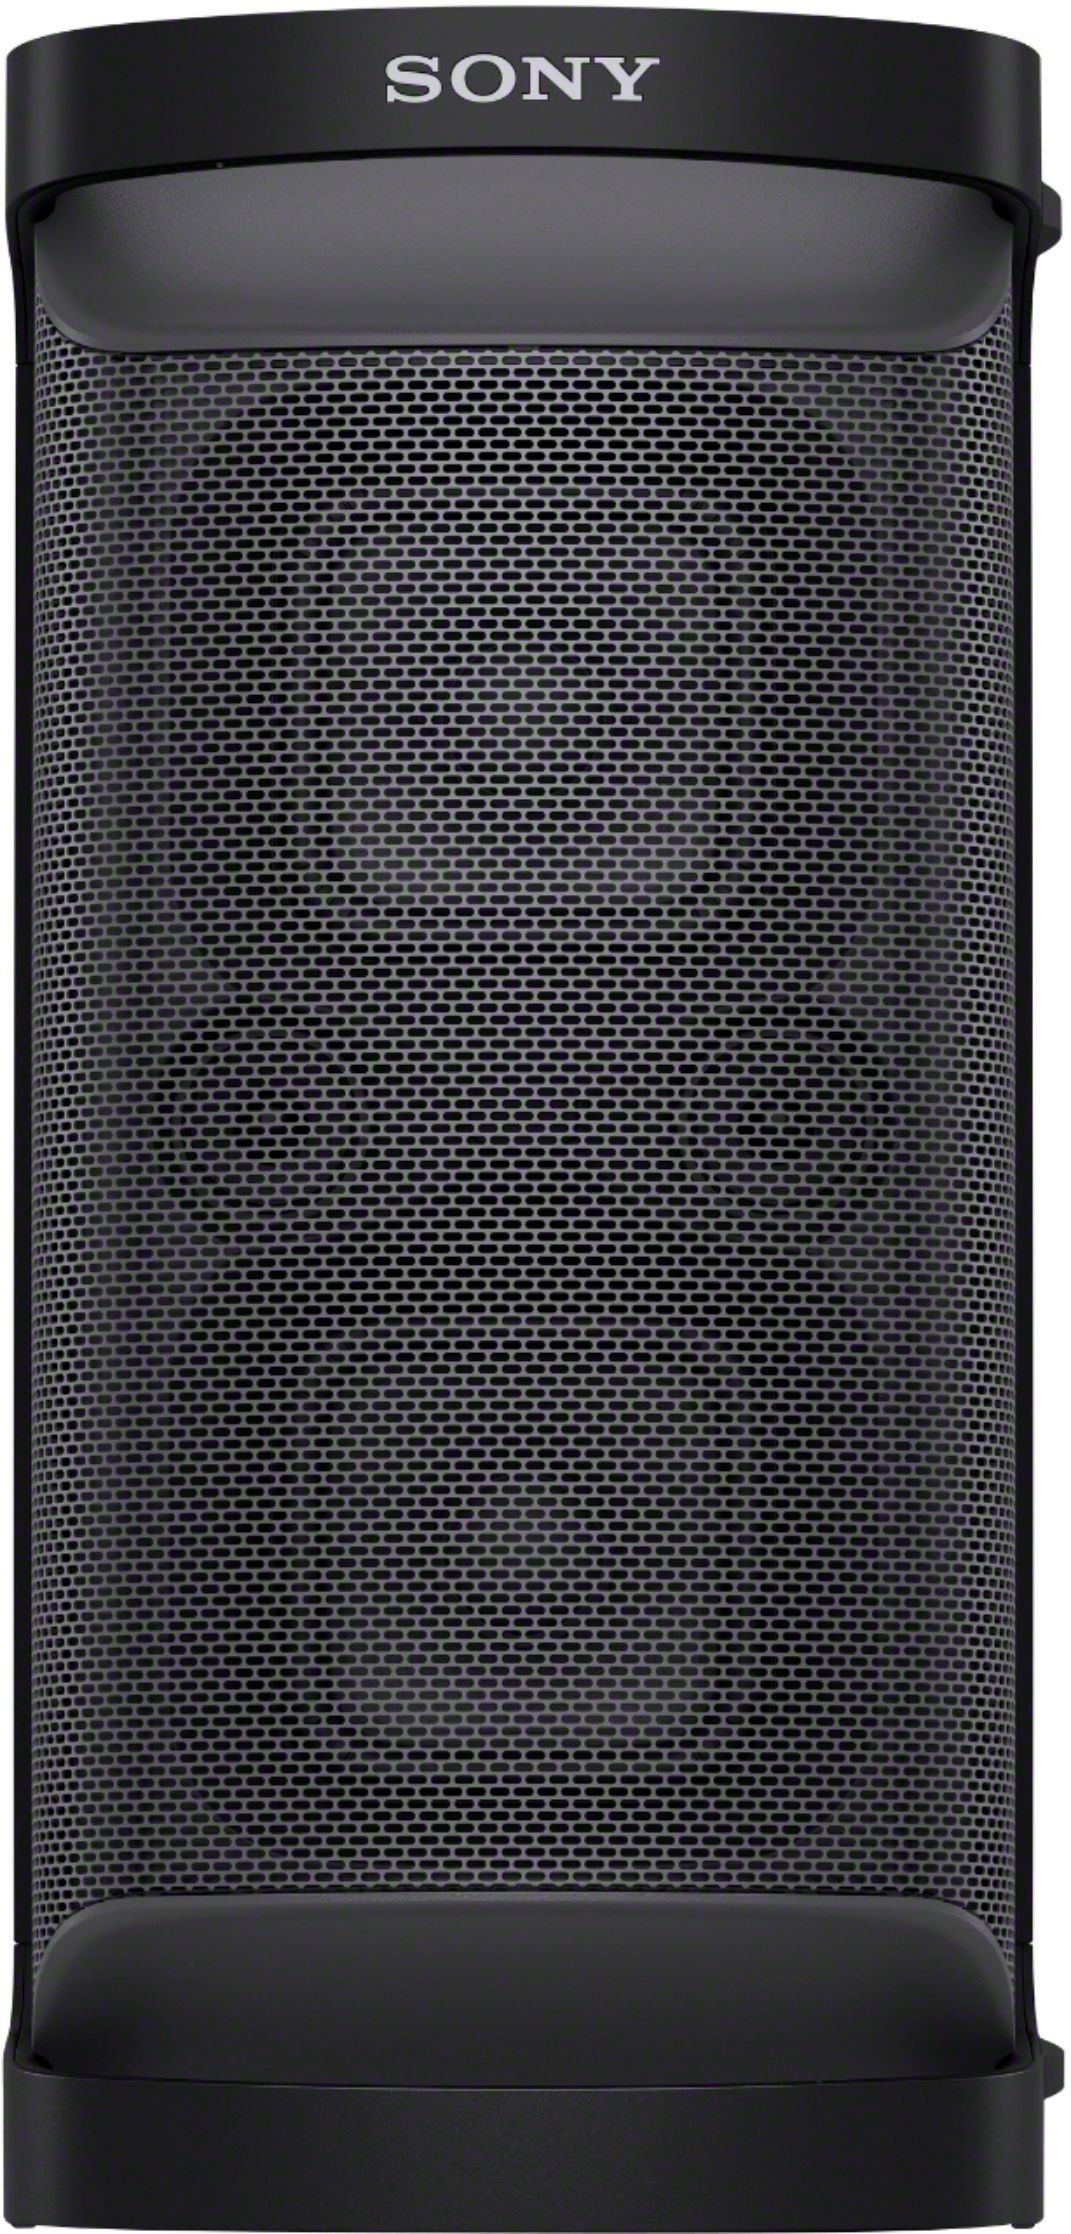 Black Resistance Portable Buy - Water Party Speaker XP500 with Best Sony Bluetooth SRSXP500